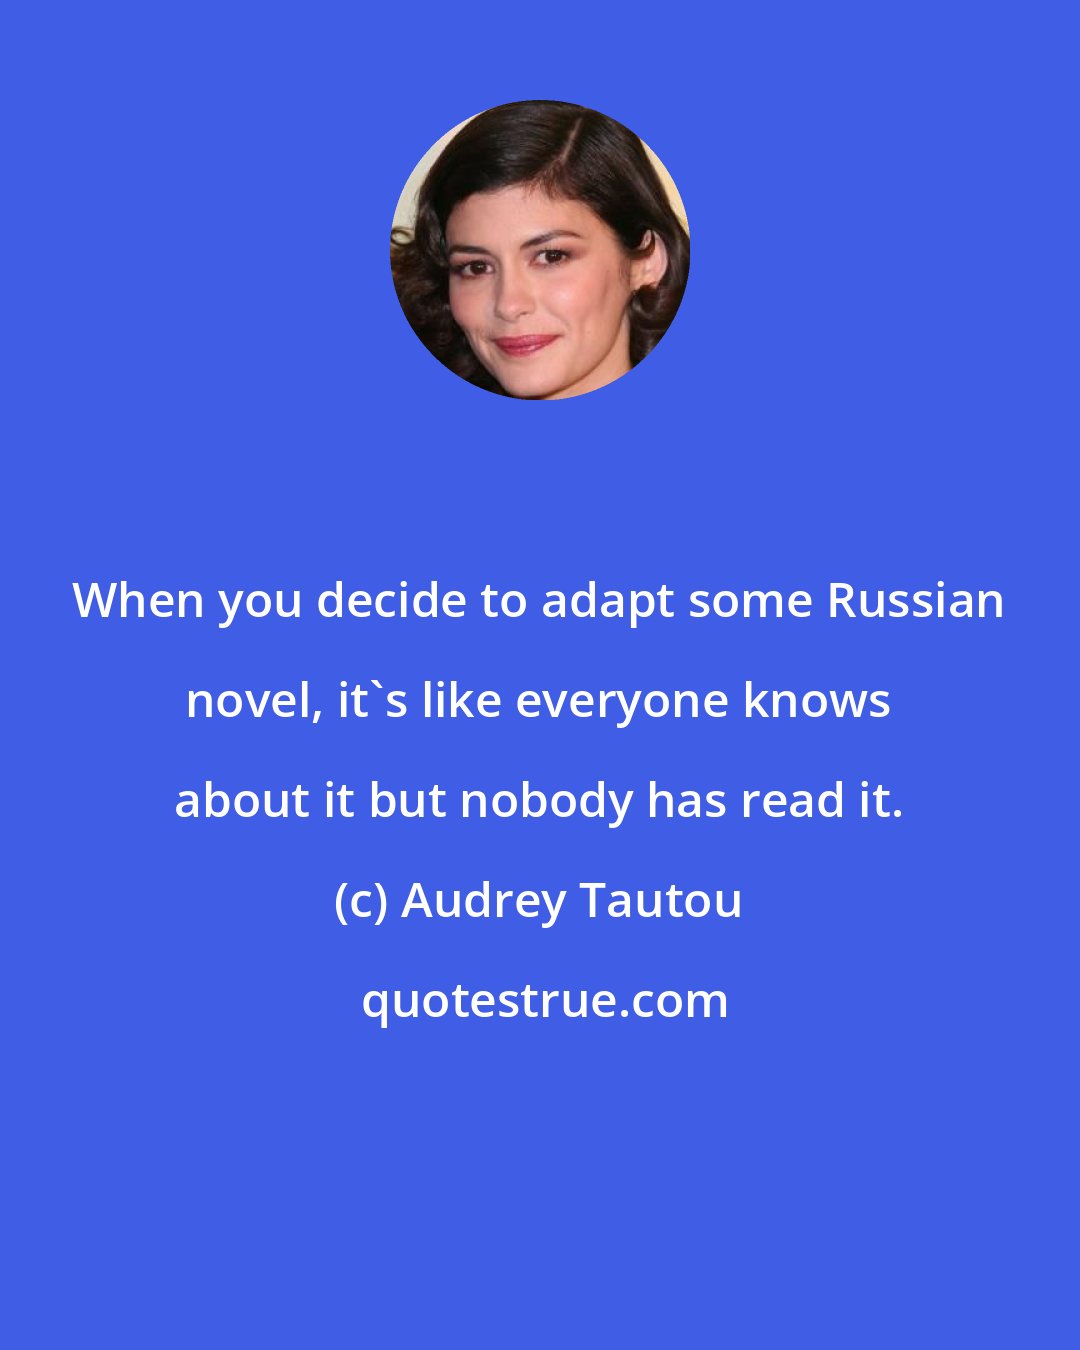 Audrey Tautou: When you decide to adapt some Russian novel, it's like everyone knows about it but nobody has read it.